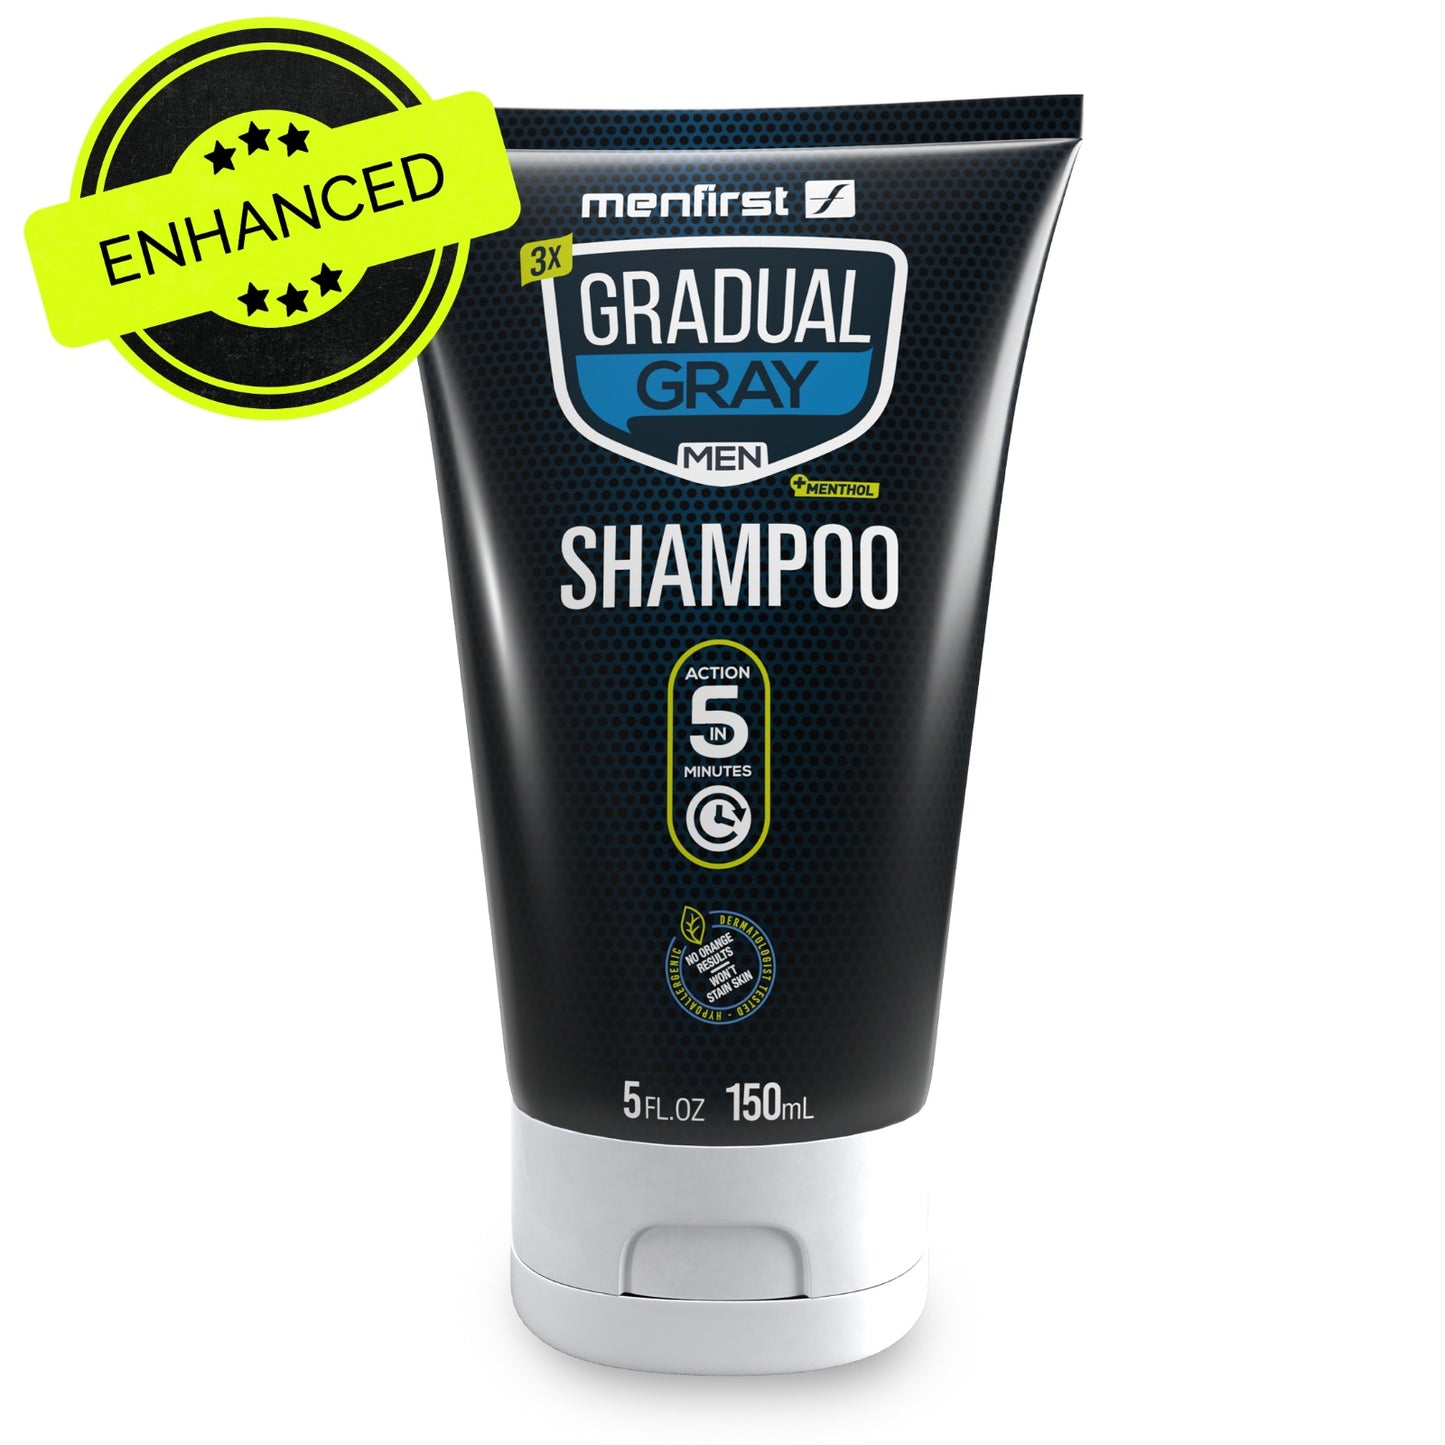 Join Menfirst Club - Receive Gradual Gray 3 in 1 Shampoo Every Month - Subscribe & Save